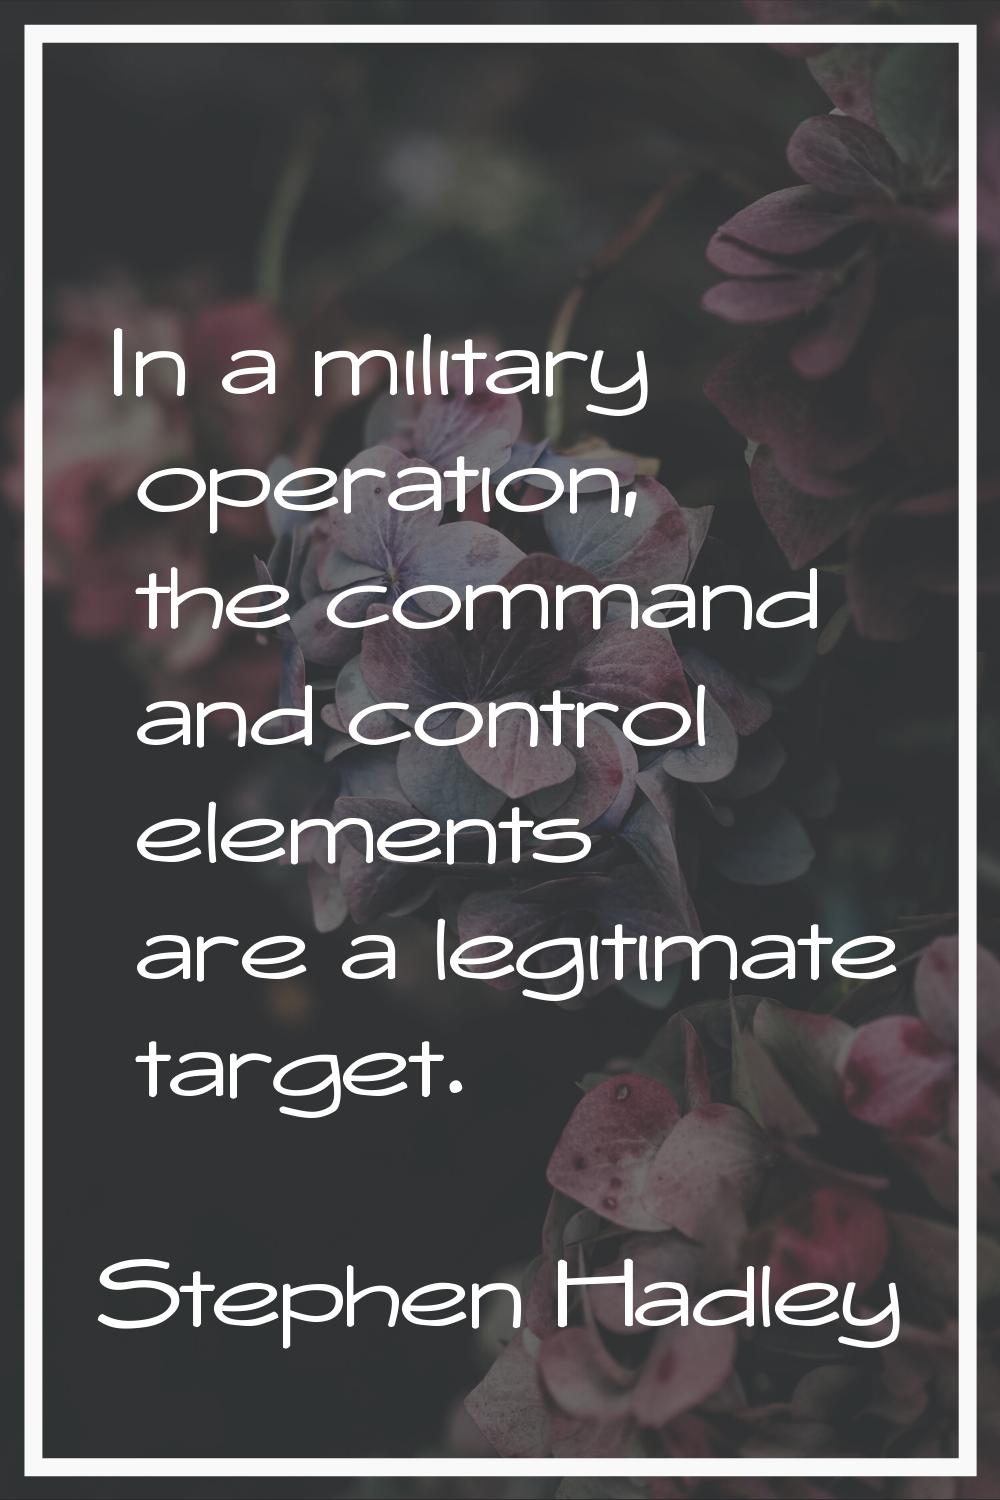 In a military operation, the command and control elements are a legitimate target.